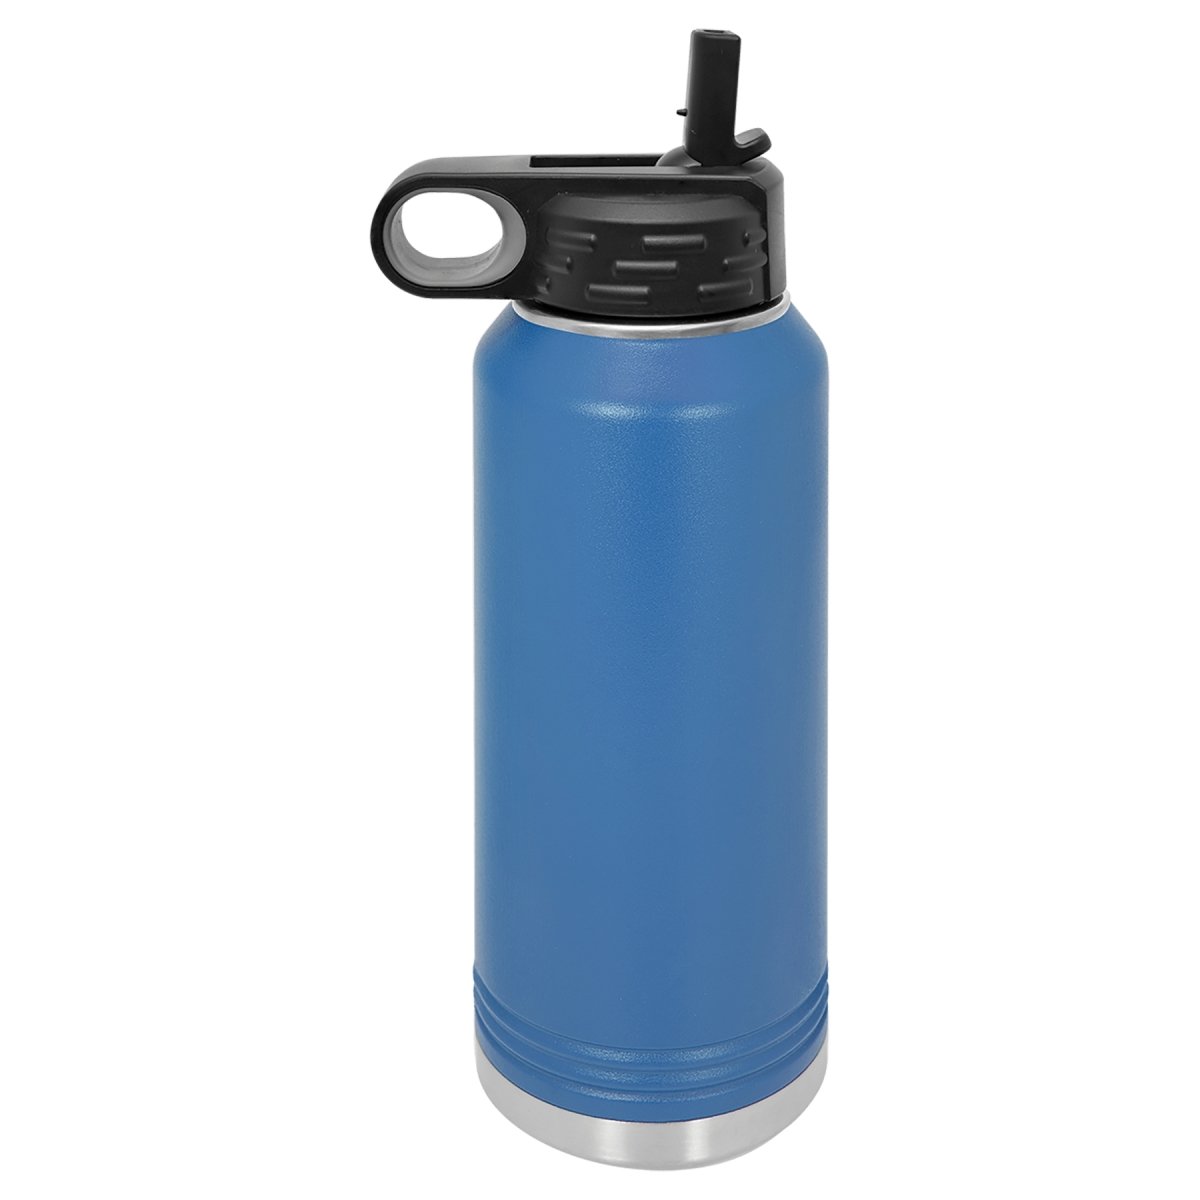 LARS NYSØM Stainless Steel Insulated Water Bottle 12oz 17oz 25oz 34oz 51oz  | BPA-free Insulated Ther…See more LARS NYSØM Stainless Steel Insulated